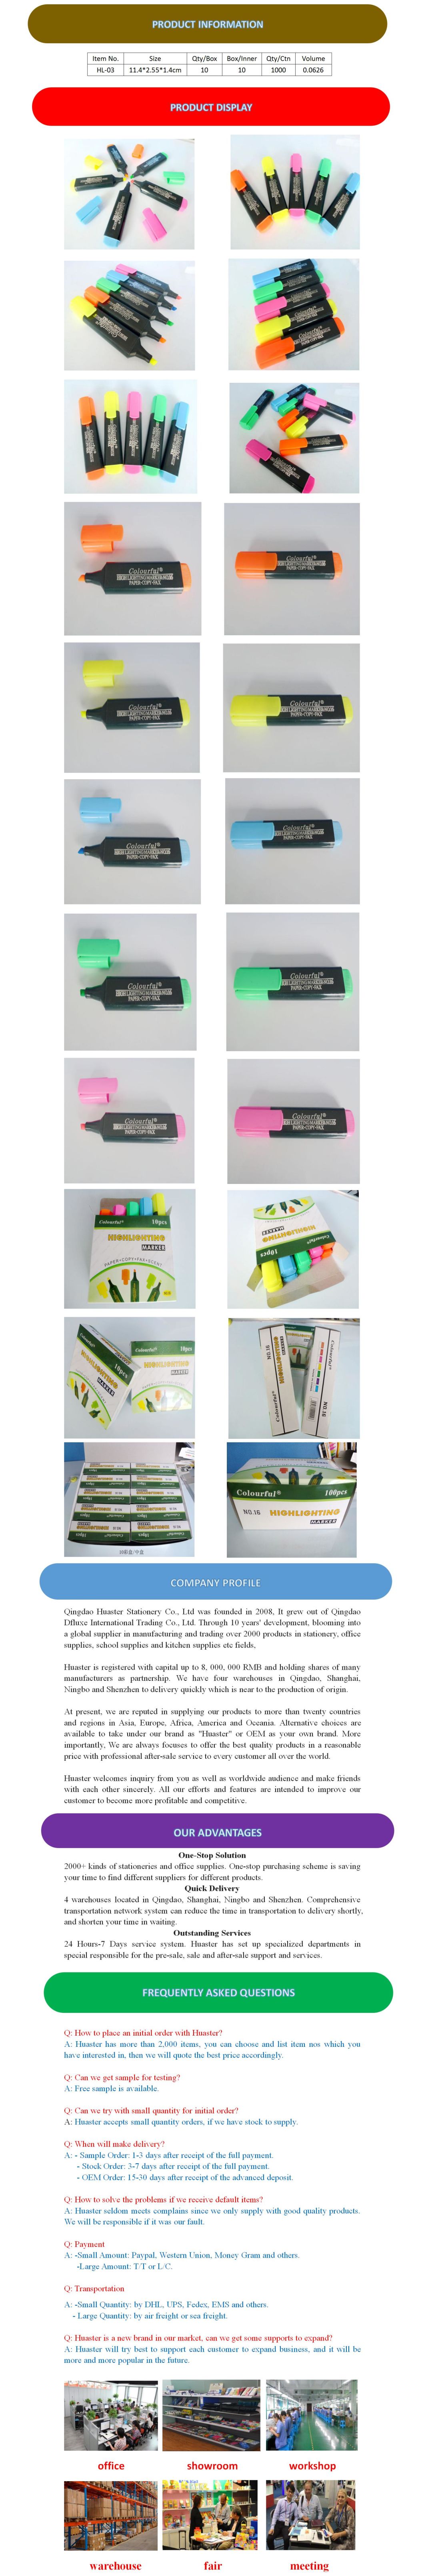 Hot Sale Good Quality Office Stationery Student Kids Colorful Highlighter